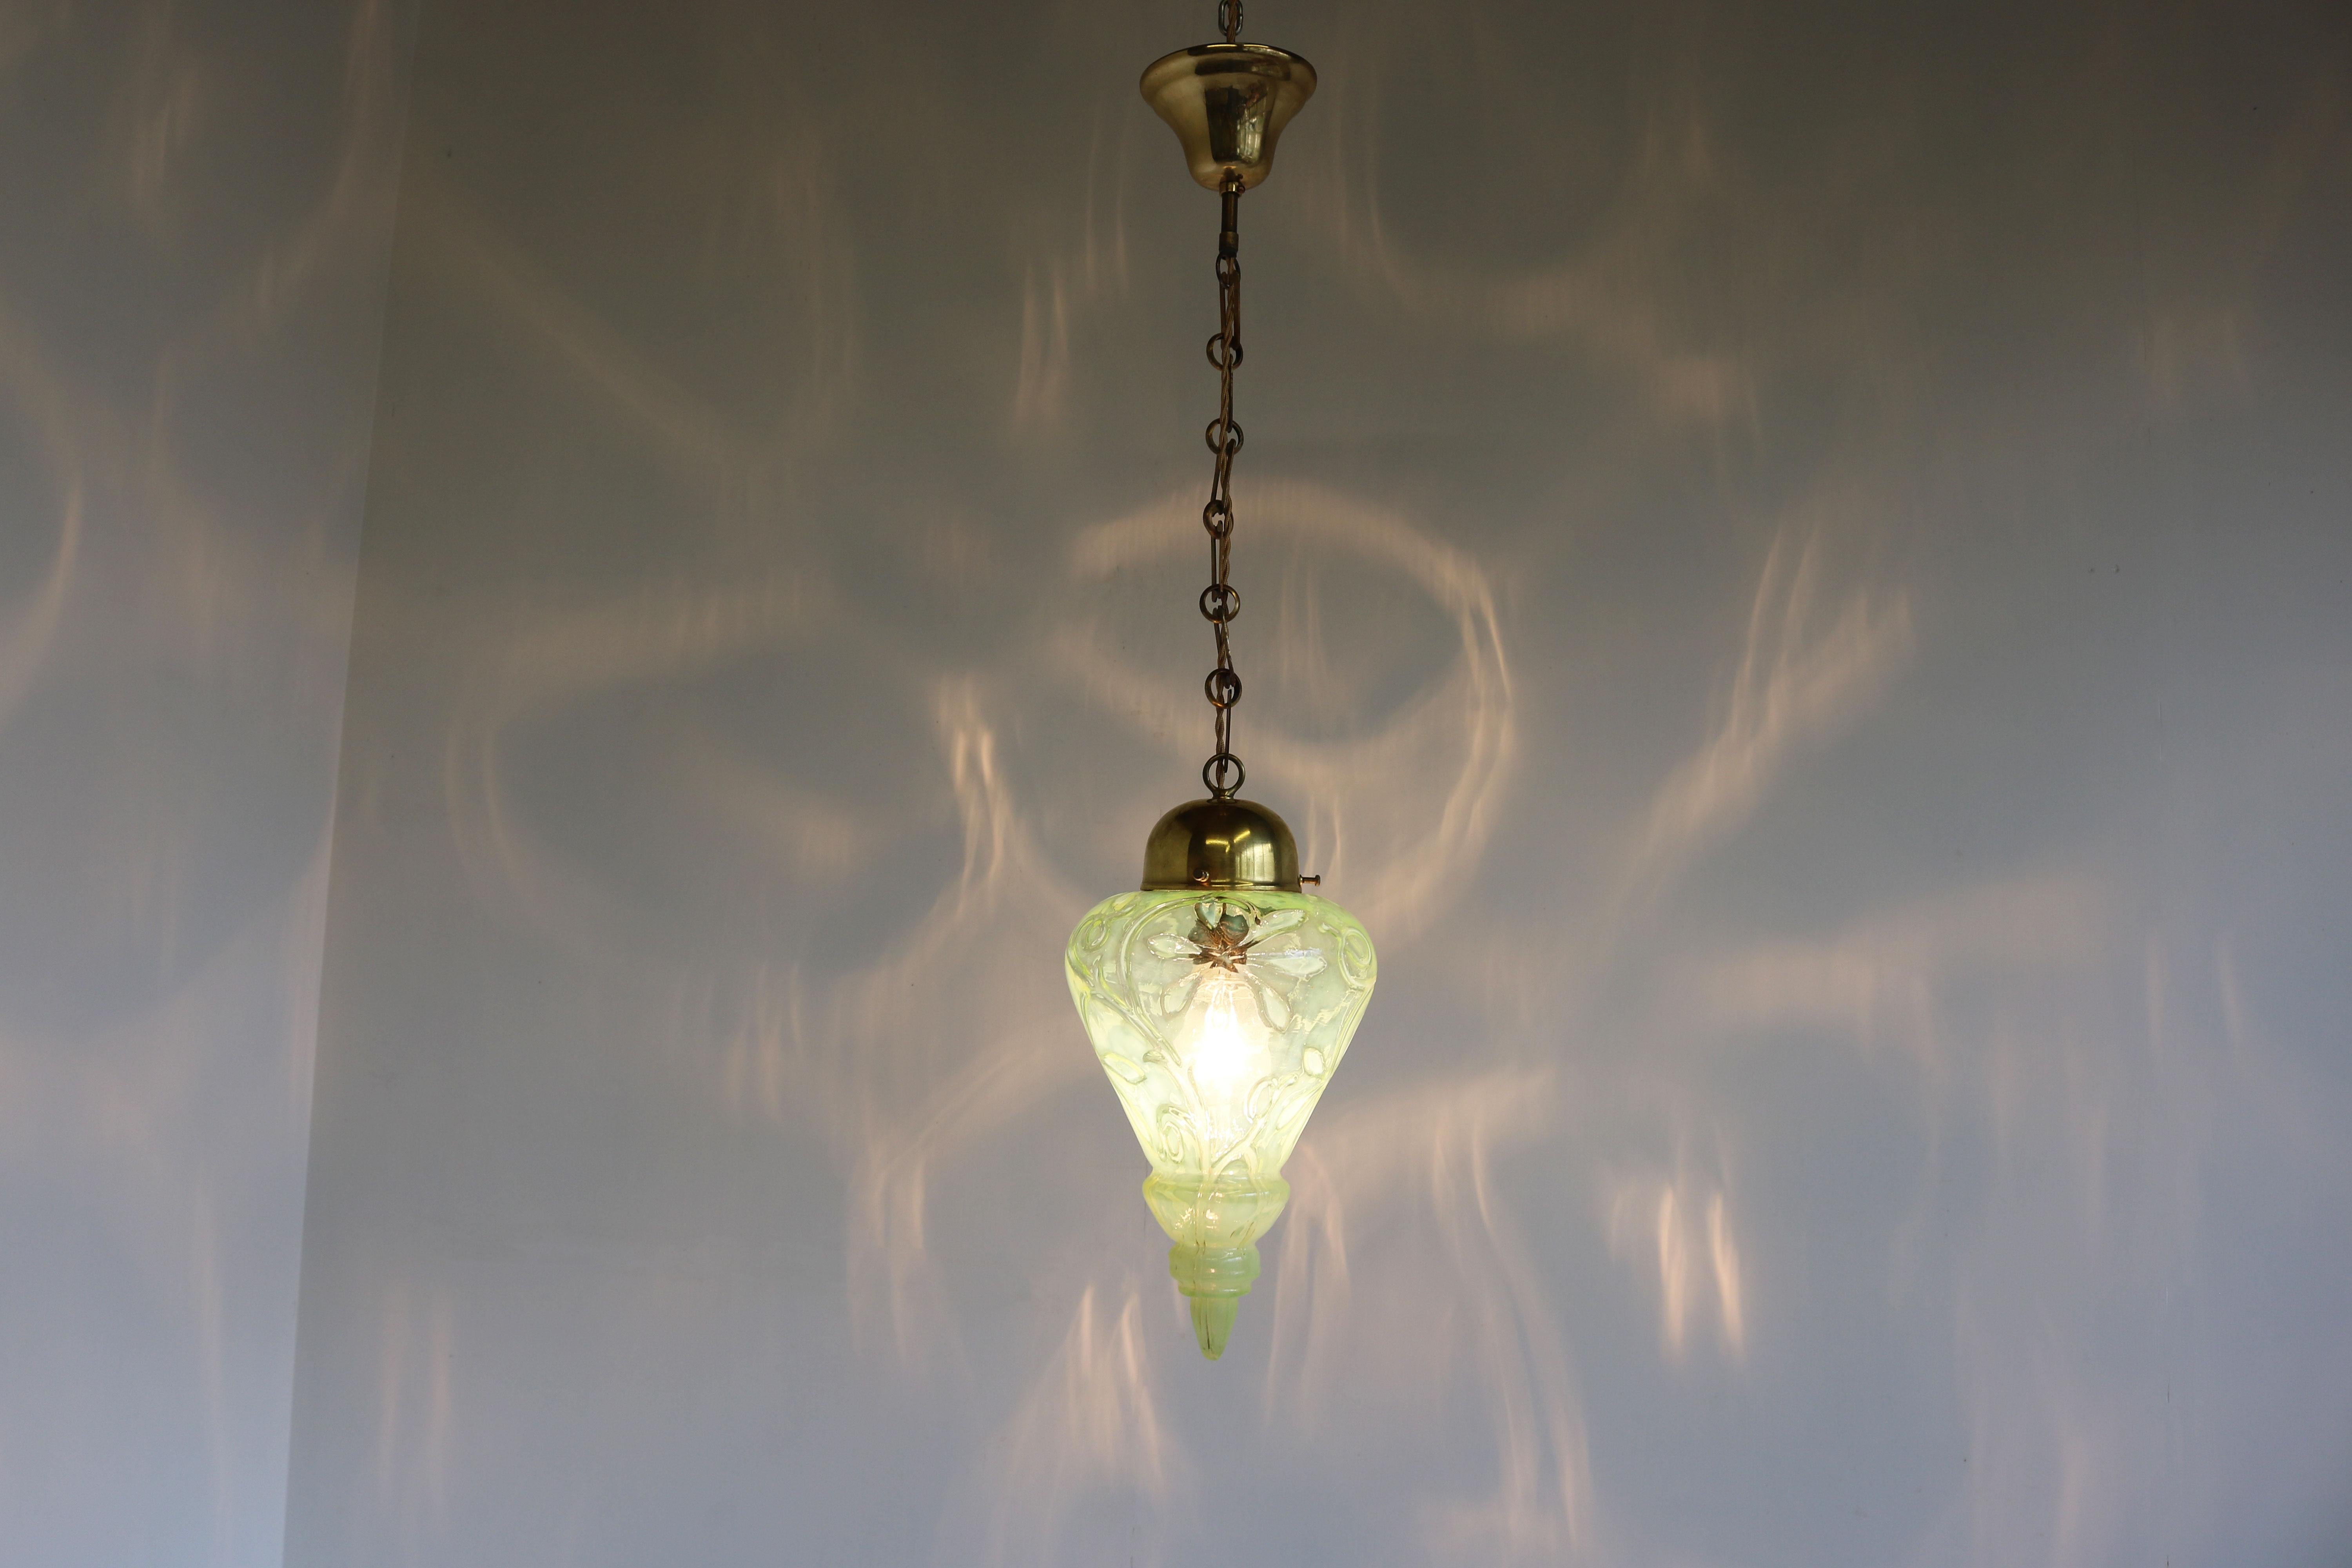 Rare Arts & Crafts brass hanging lamp with vaseline glass shade. Designed & produced by: Henry G. Richardson & Sons, England, circa 1900. 
Stunning hand blown glass shade in perfect condition, creates a stunning light effect when lit. 
The pendant